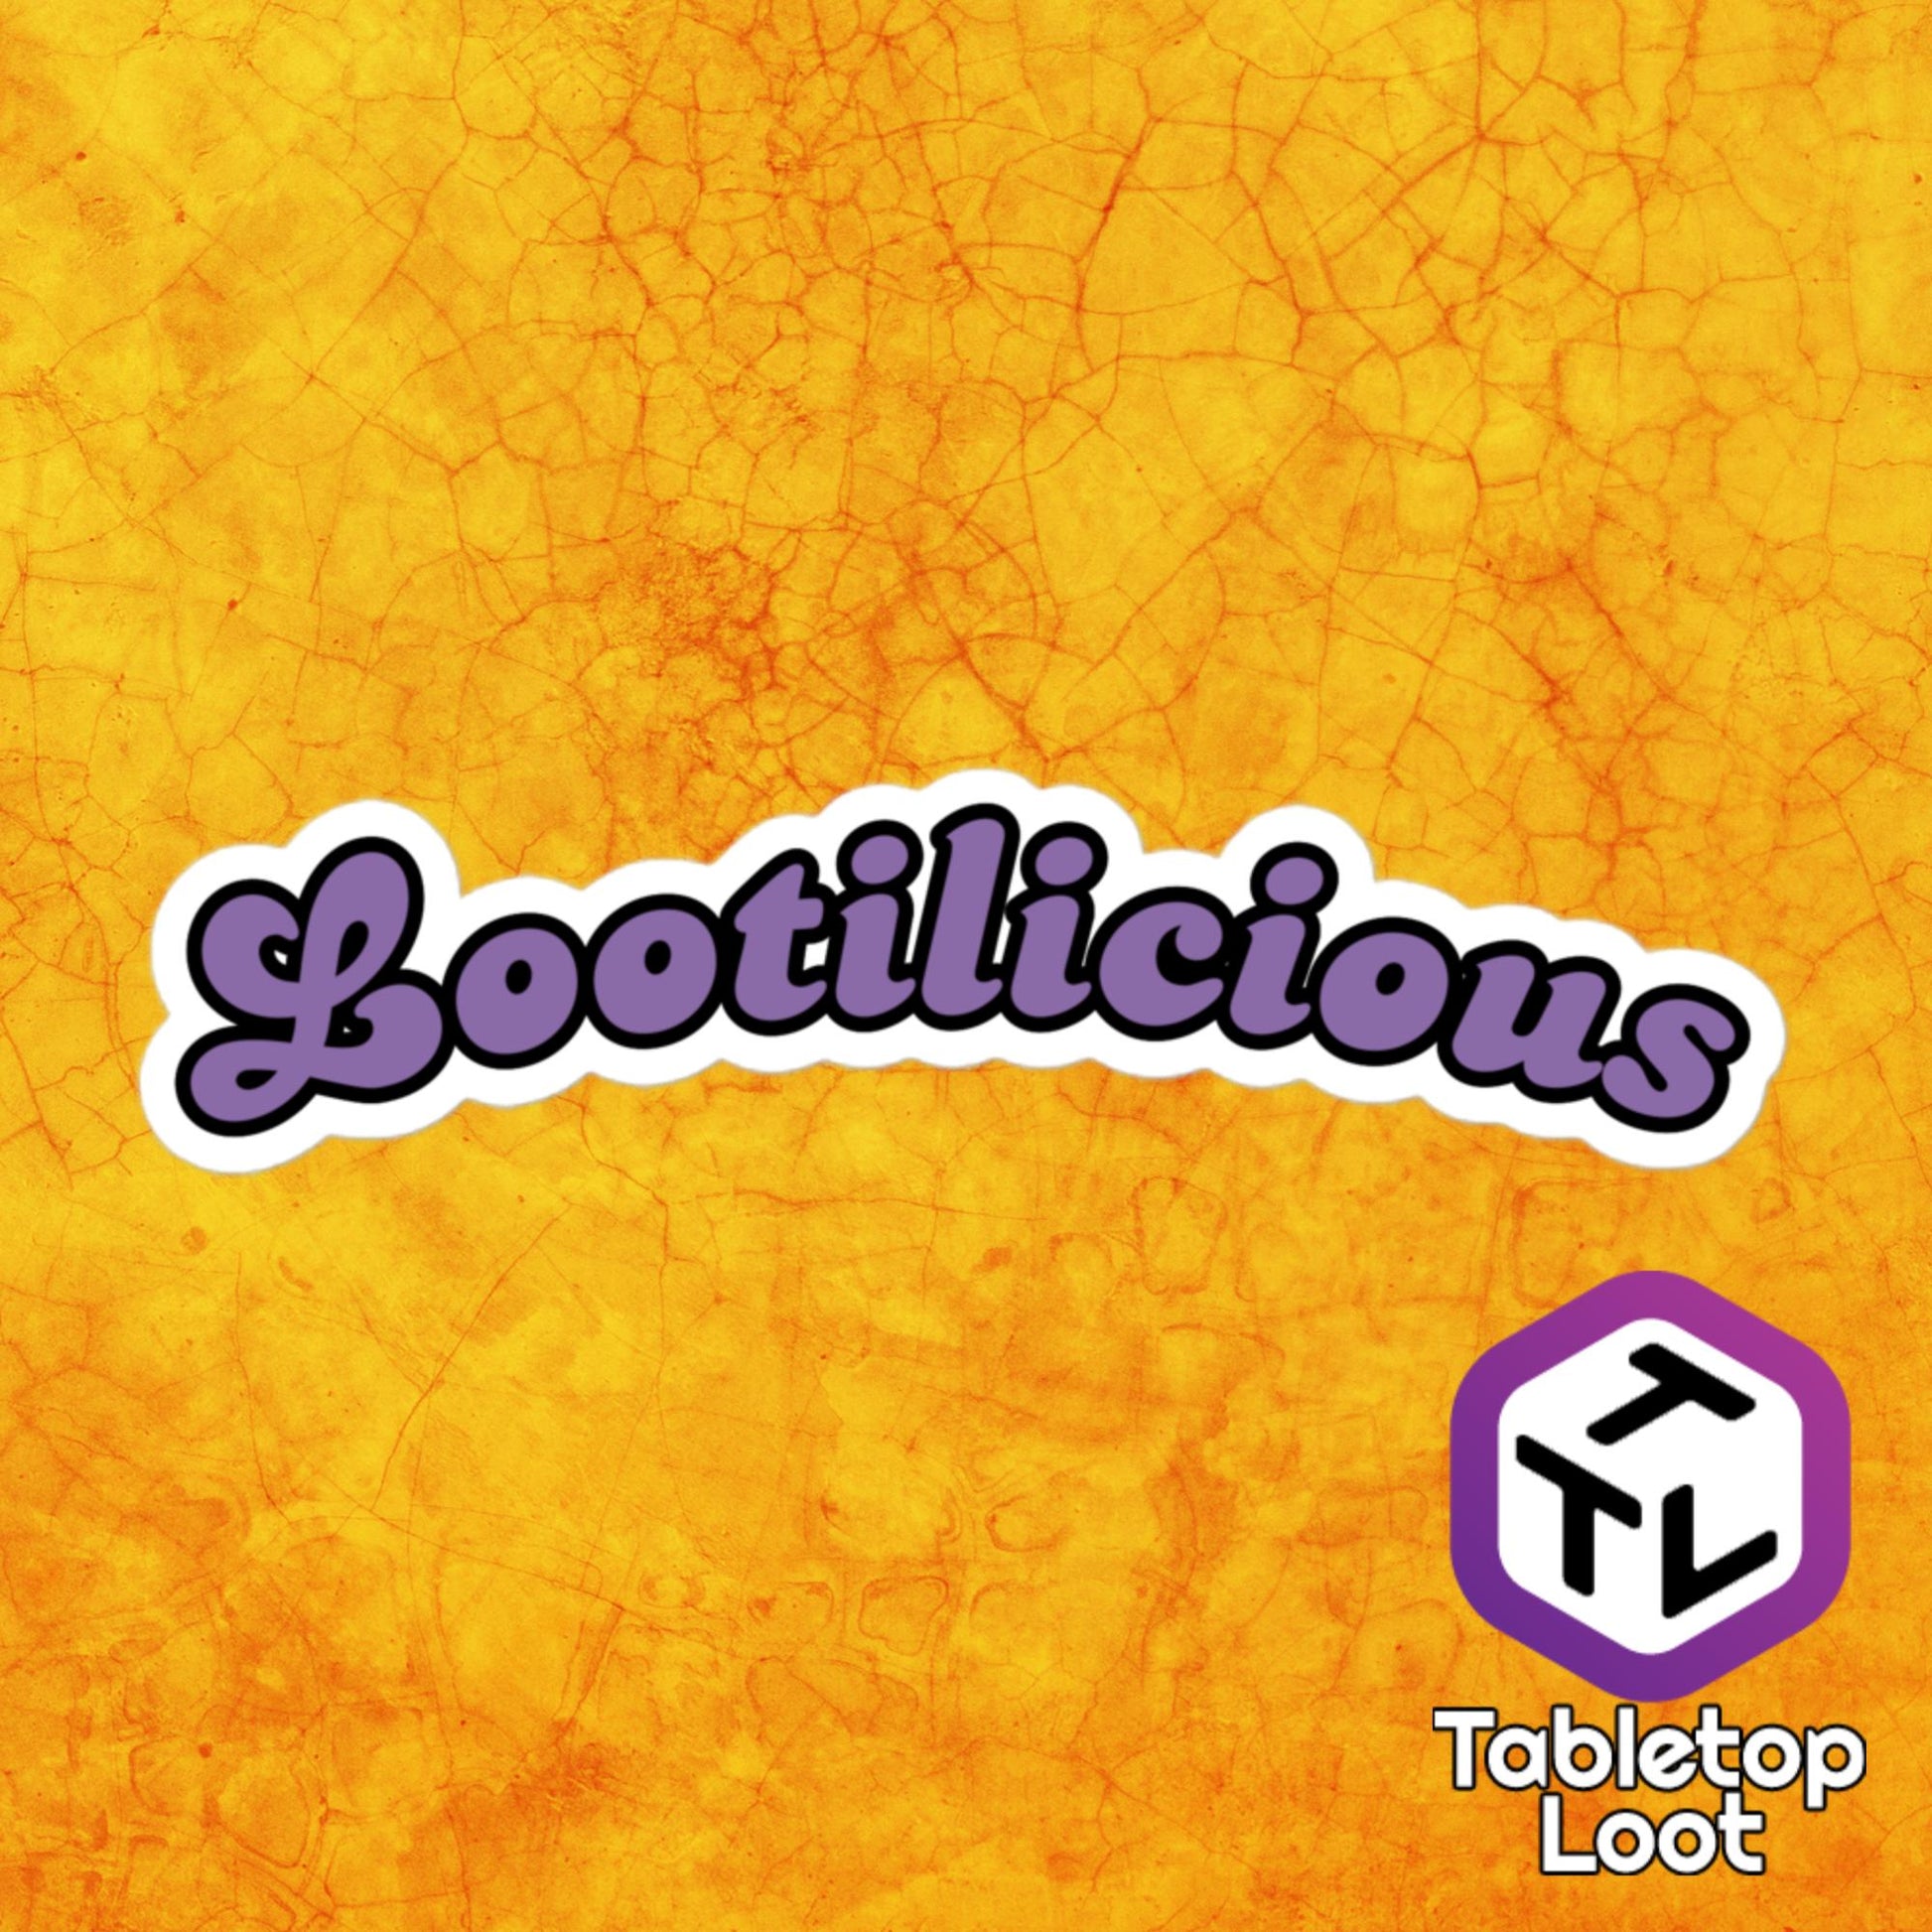 A 5 inch wide sticker says "Lootilicious" in a black outlined purple retro font.